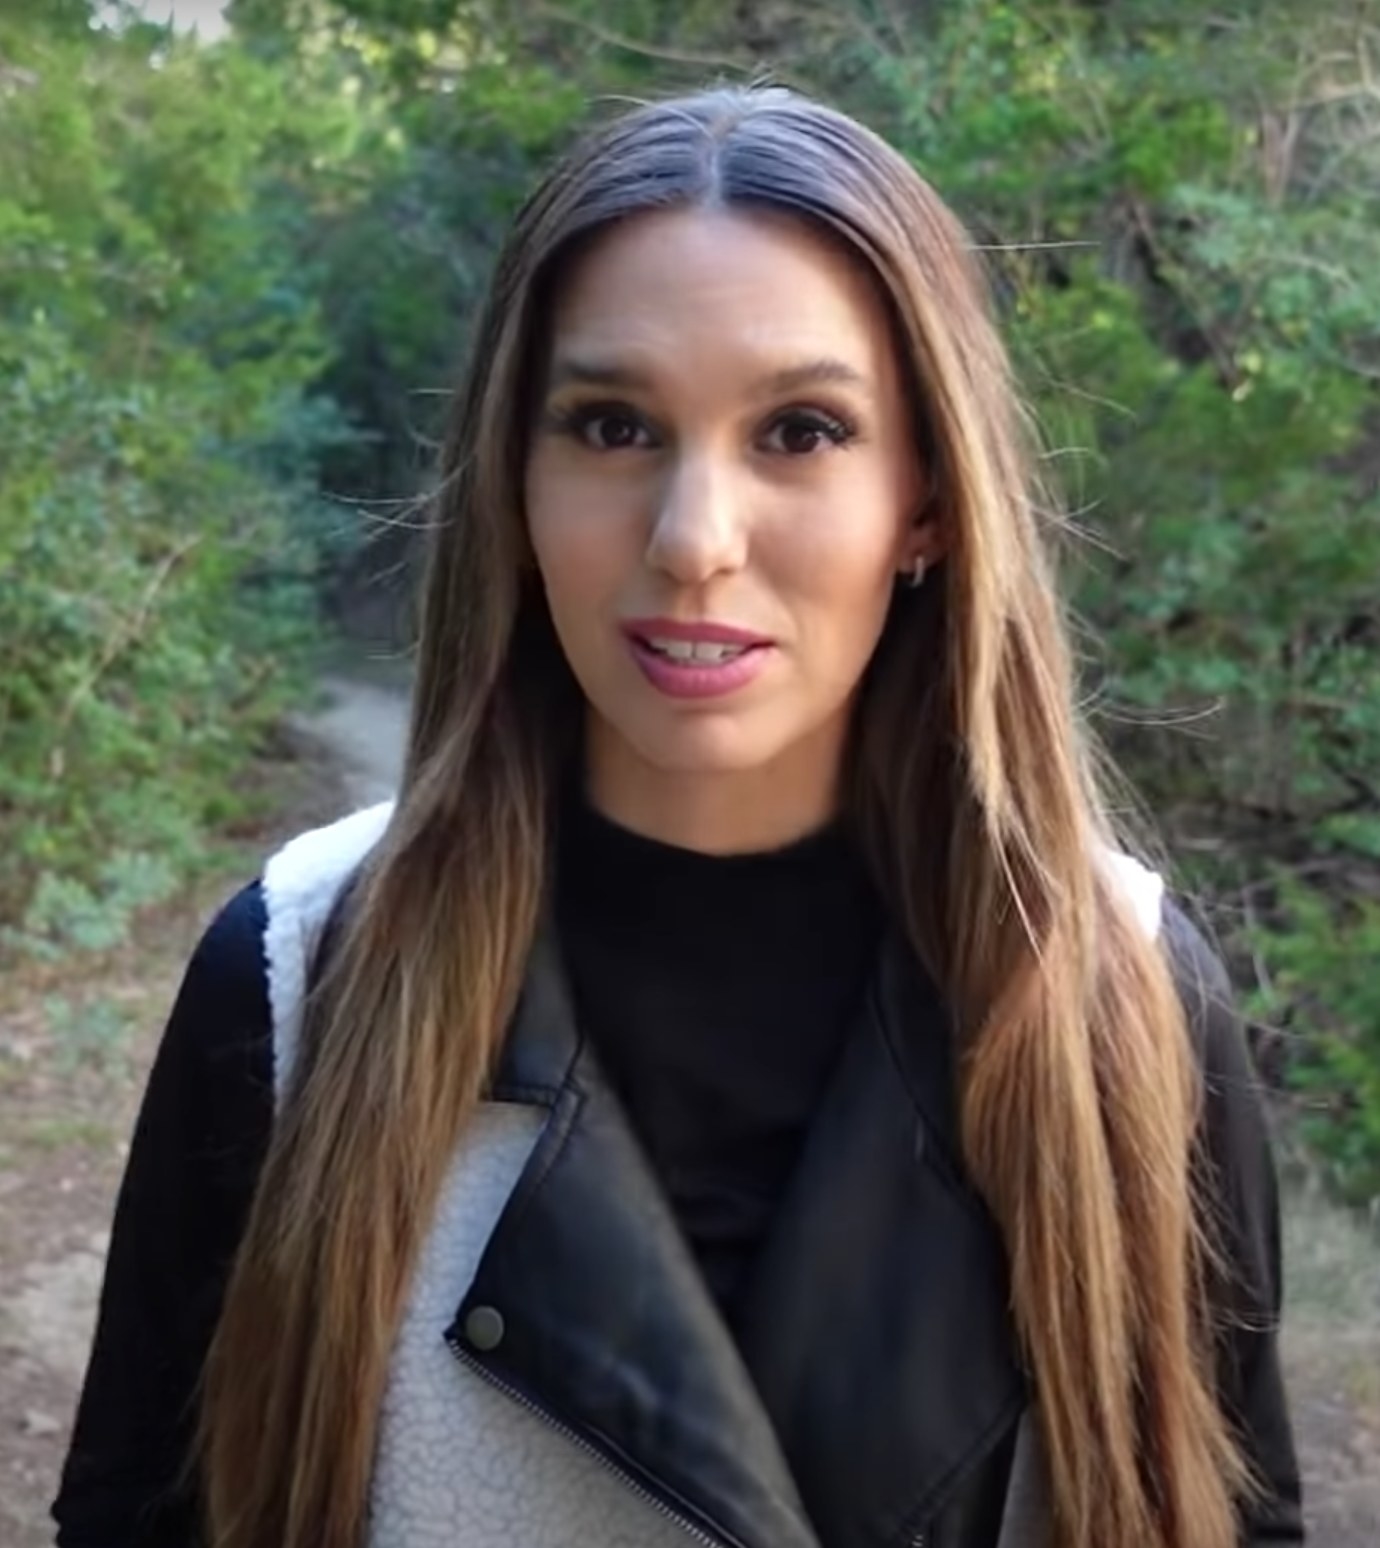 Christy Carlson Romano in a 2021 video for her YouTube channel discussing Britney Spears, Lindsay Lohan, and Paris Hilton